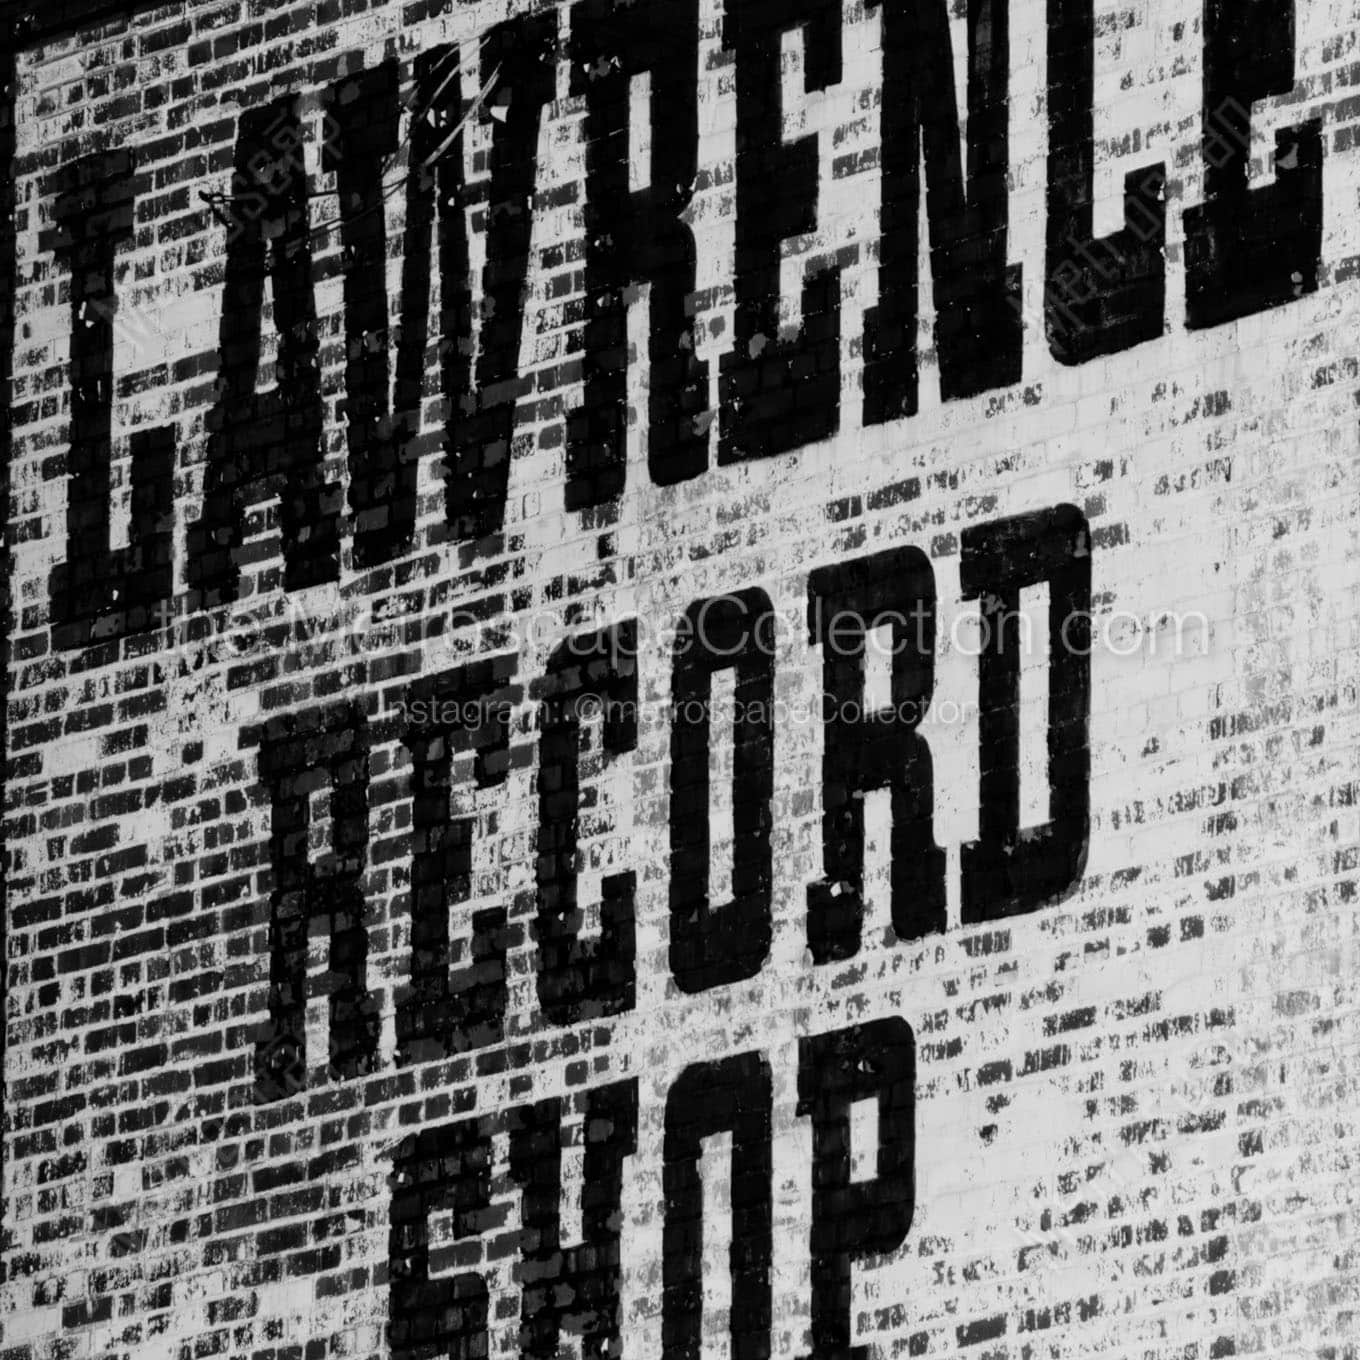 lawrence record shop Black & White Office Art